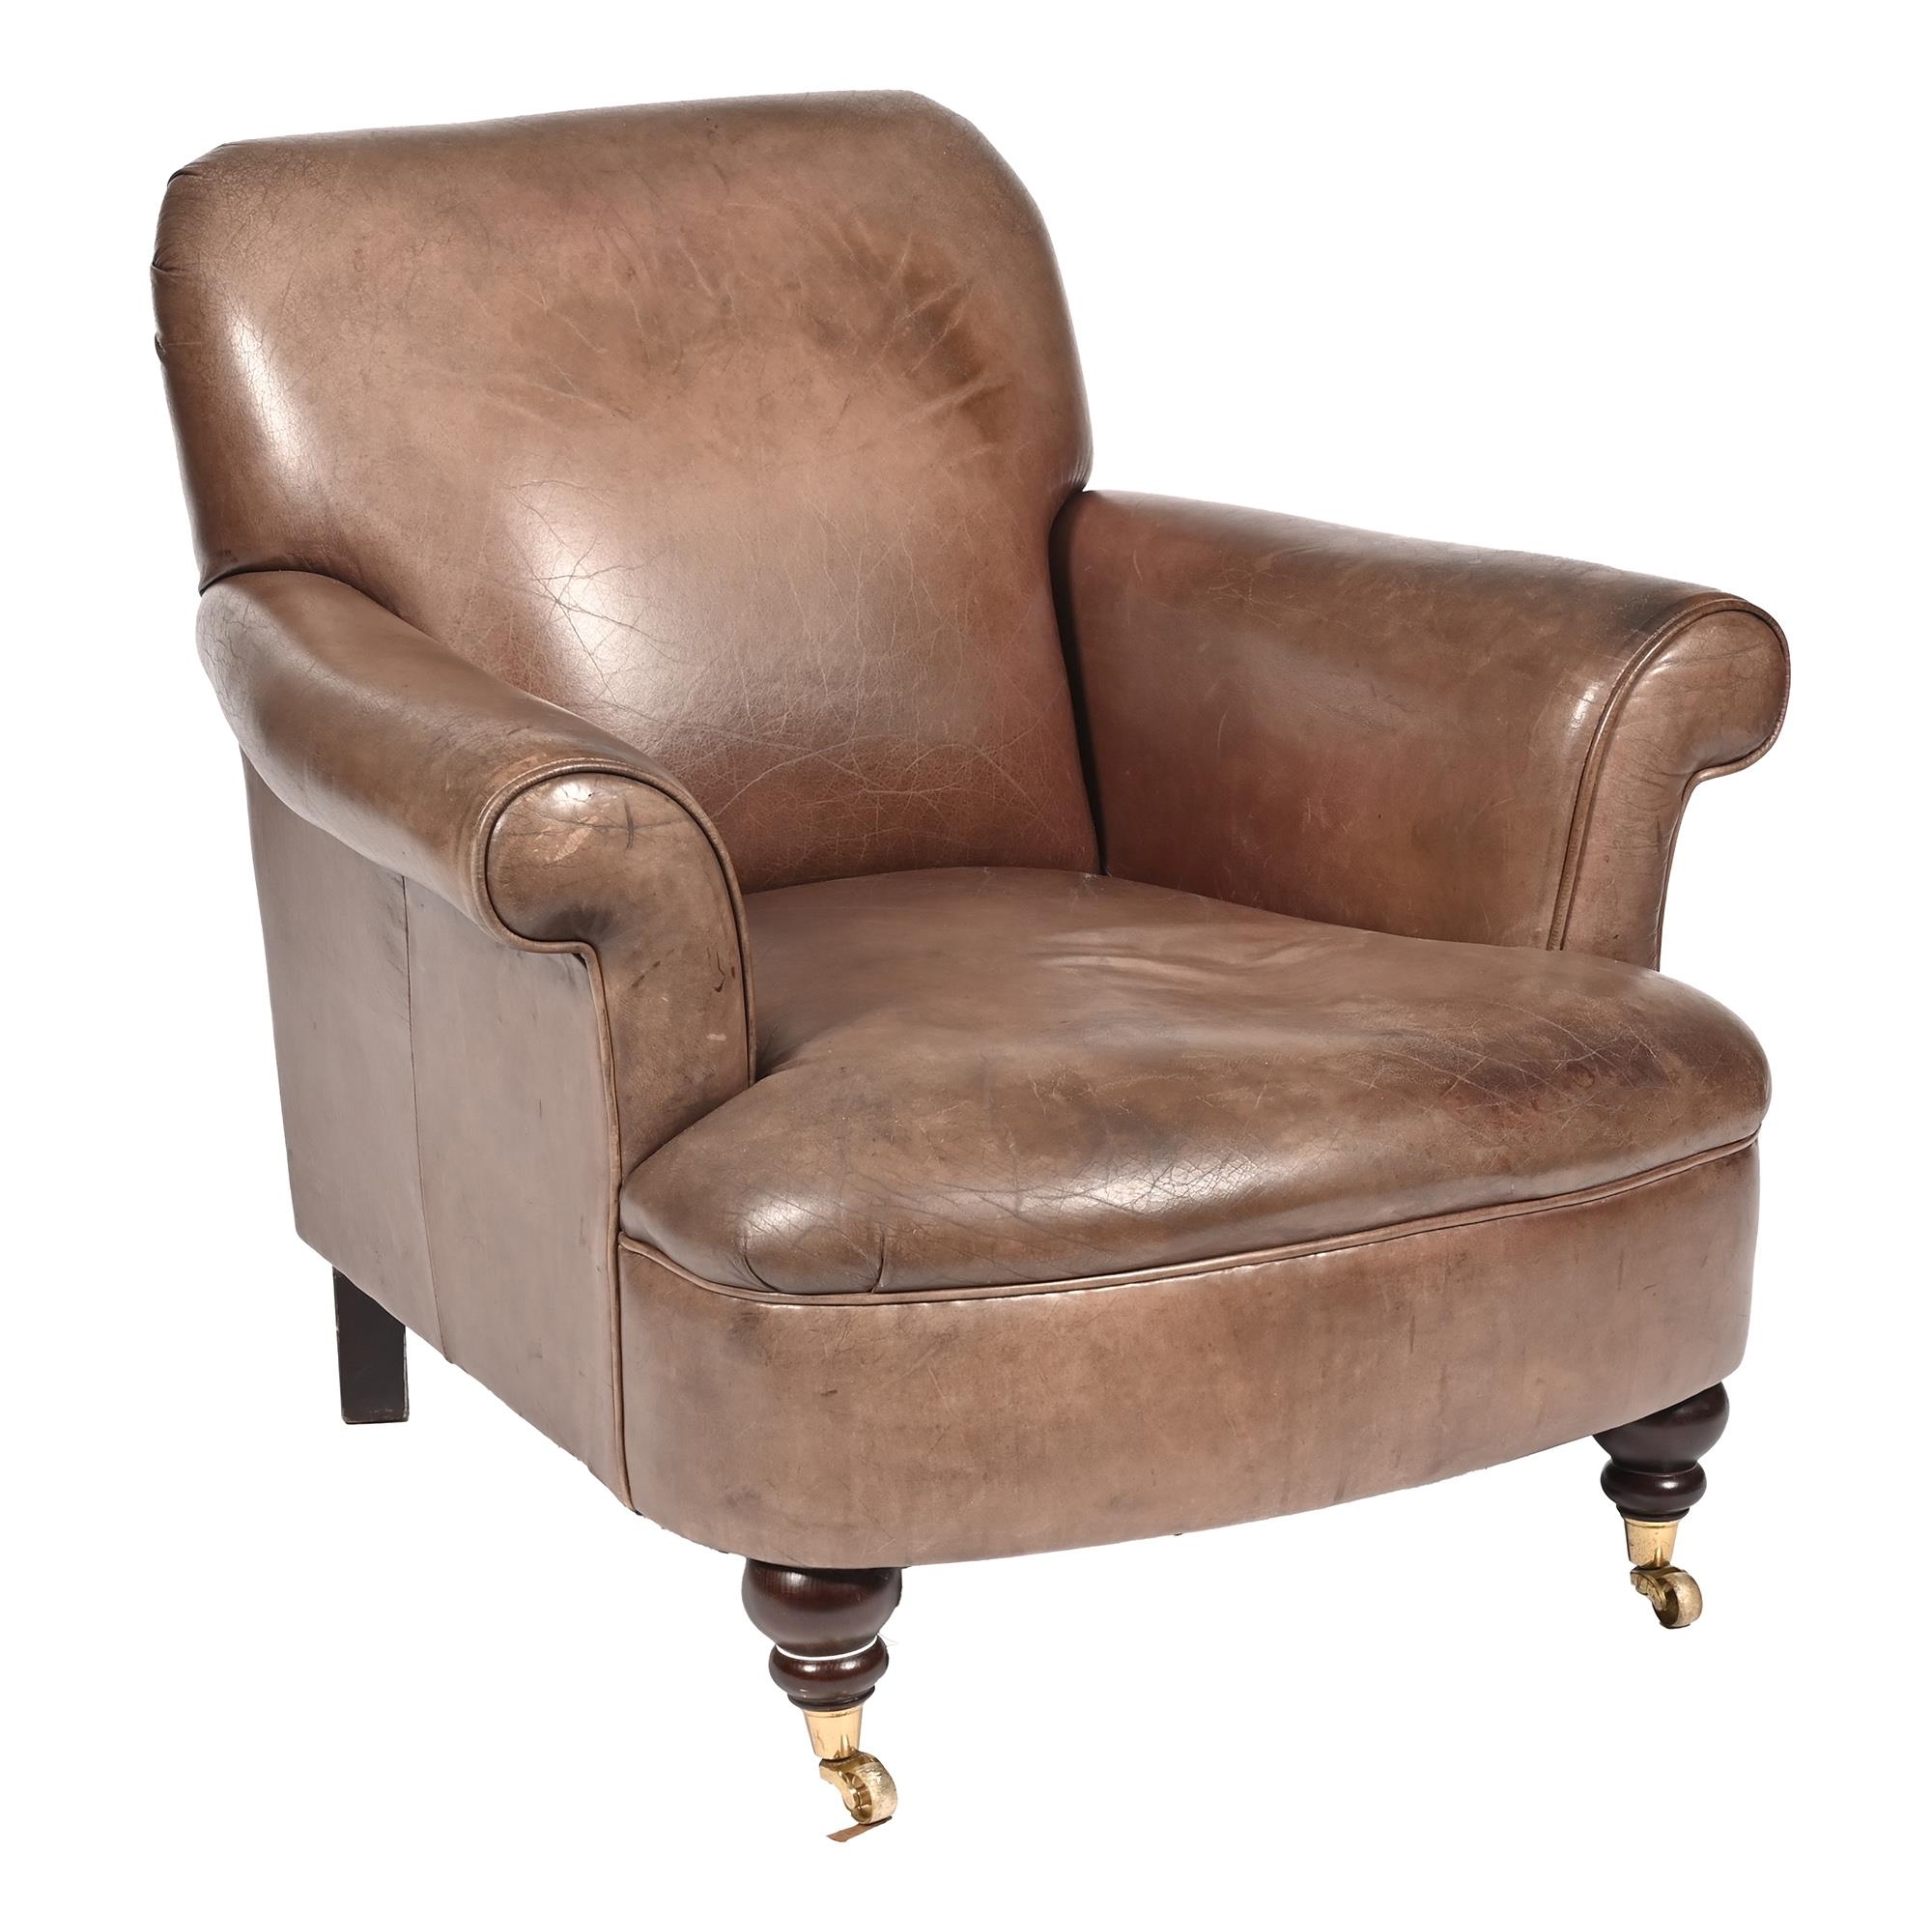 A mid 20th c brown leather armchair, turned mahogany front legs on brass castors, seat height